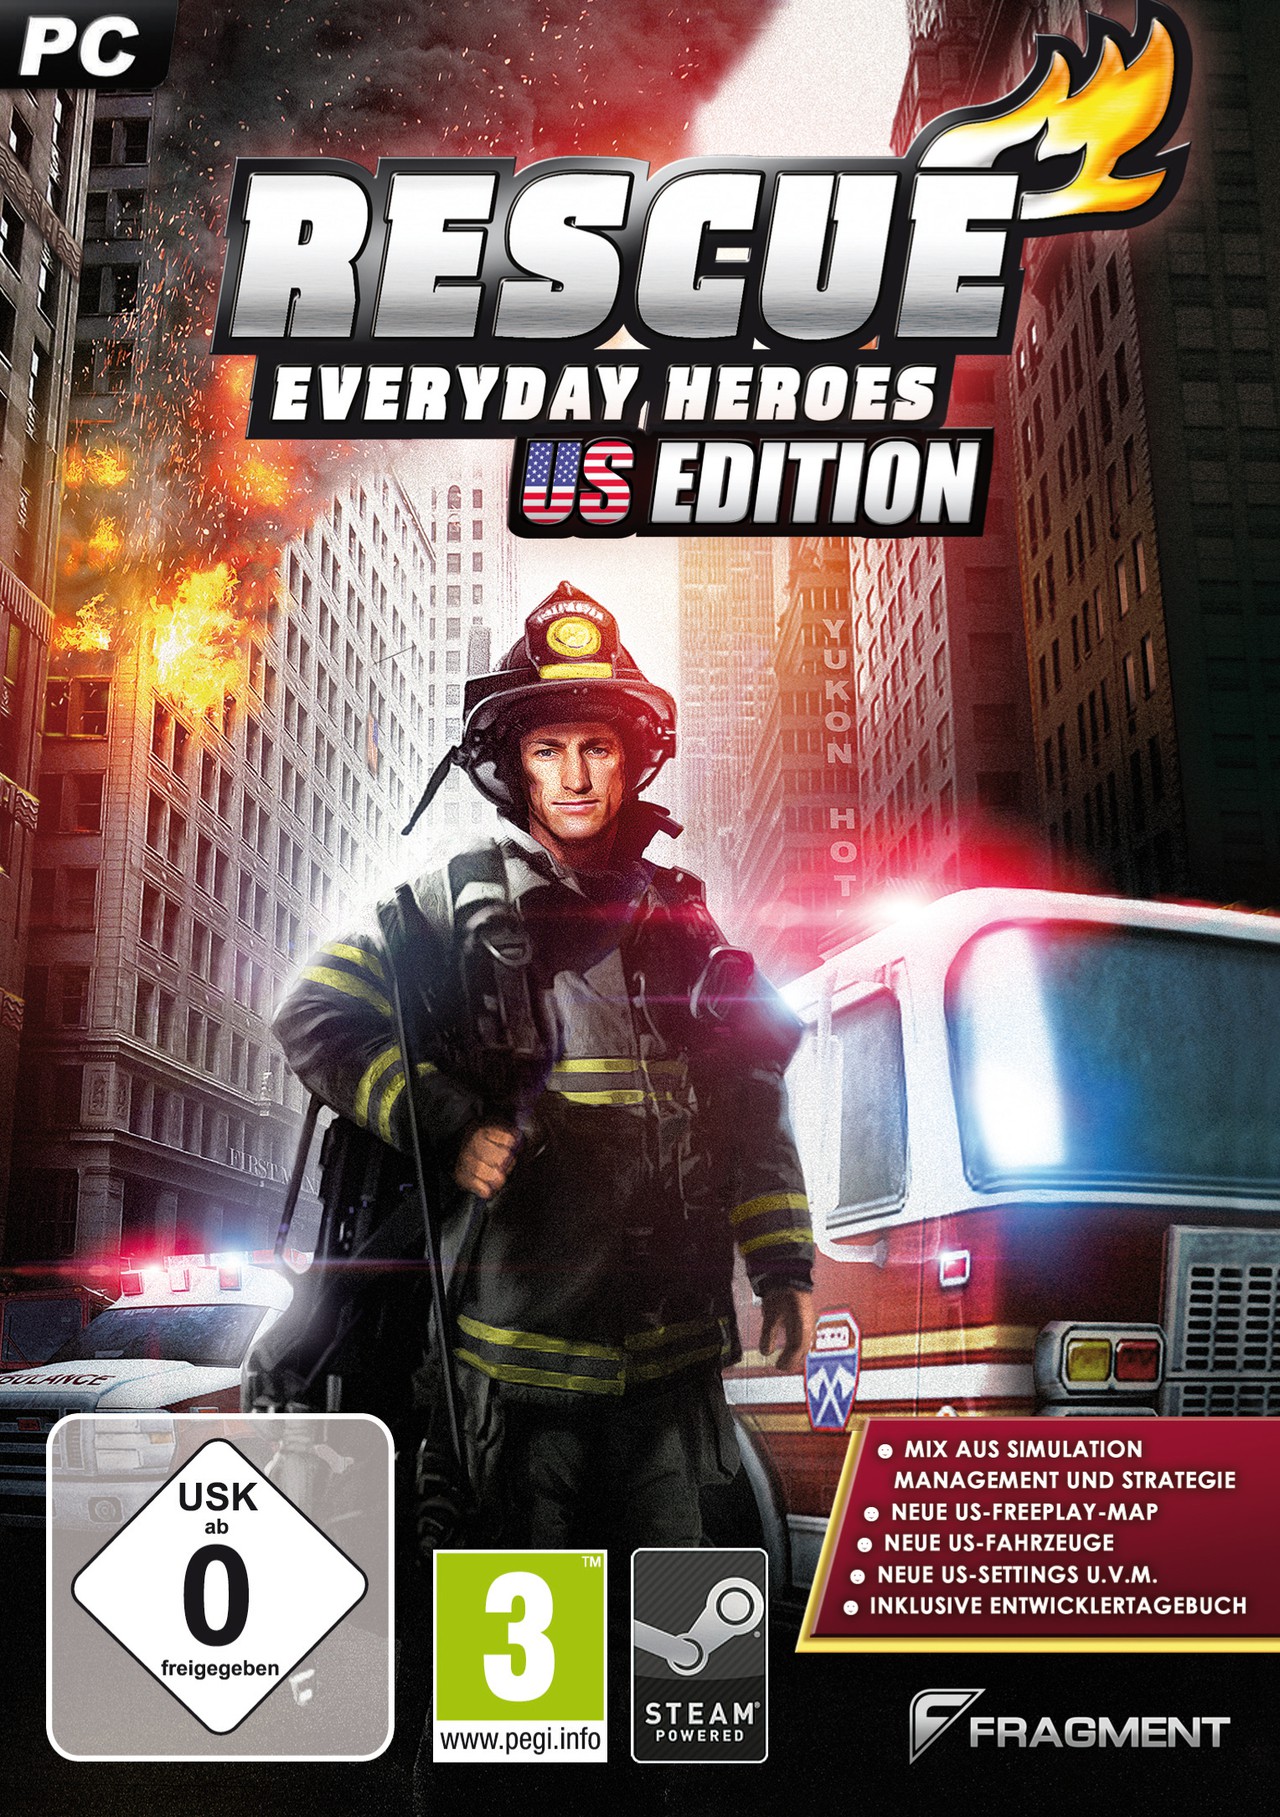 Rescue: Everyday Heroes | Video Game Reviews and Previews PC, PS4, Xbox One and mobile1280 x 1817